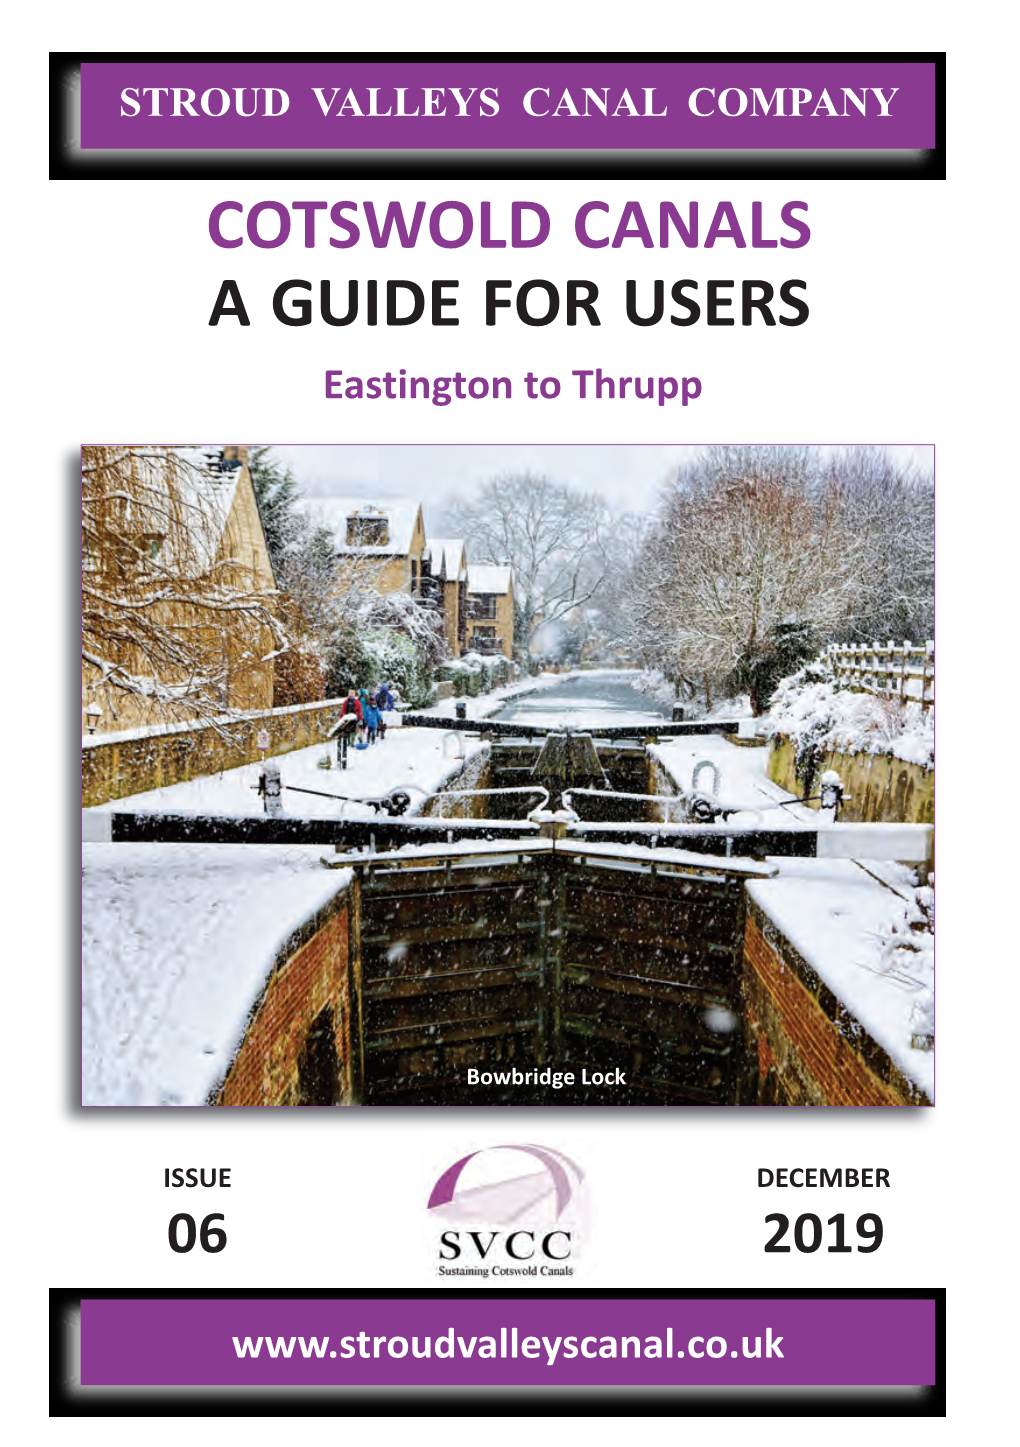 COTSWOLD CANALS a GUIDE for USERS Eastington to Thrupp